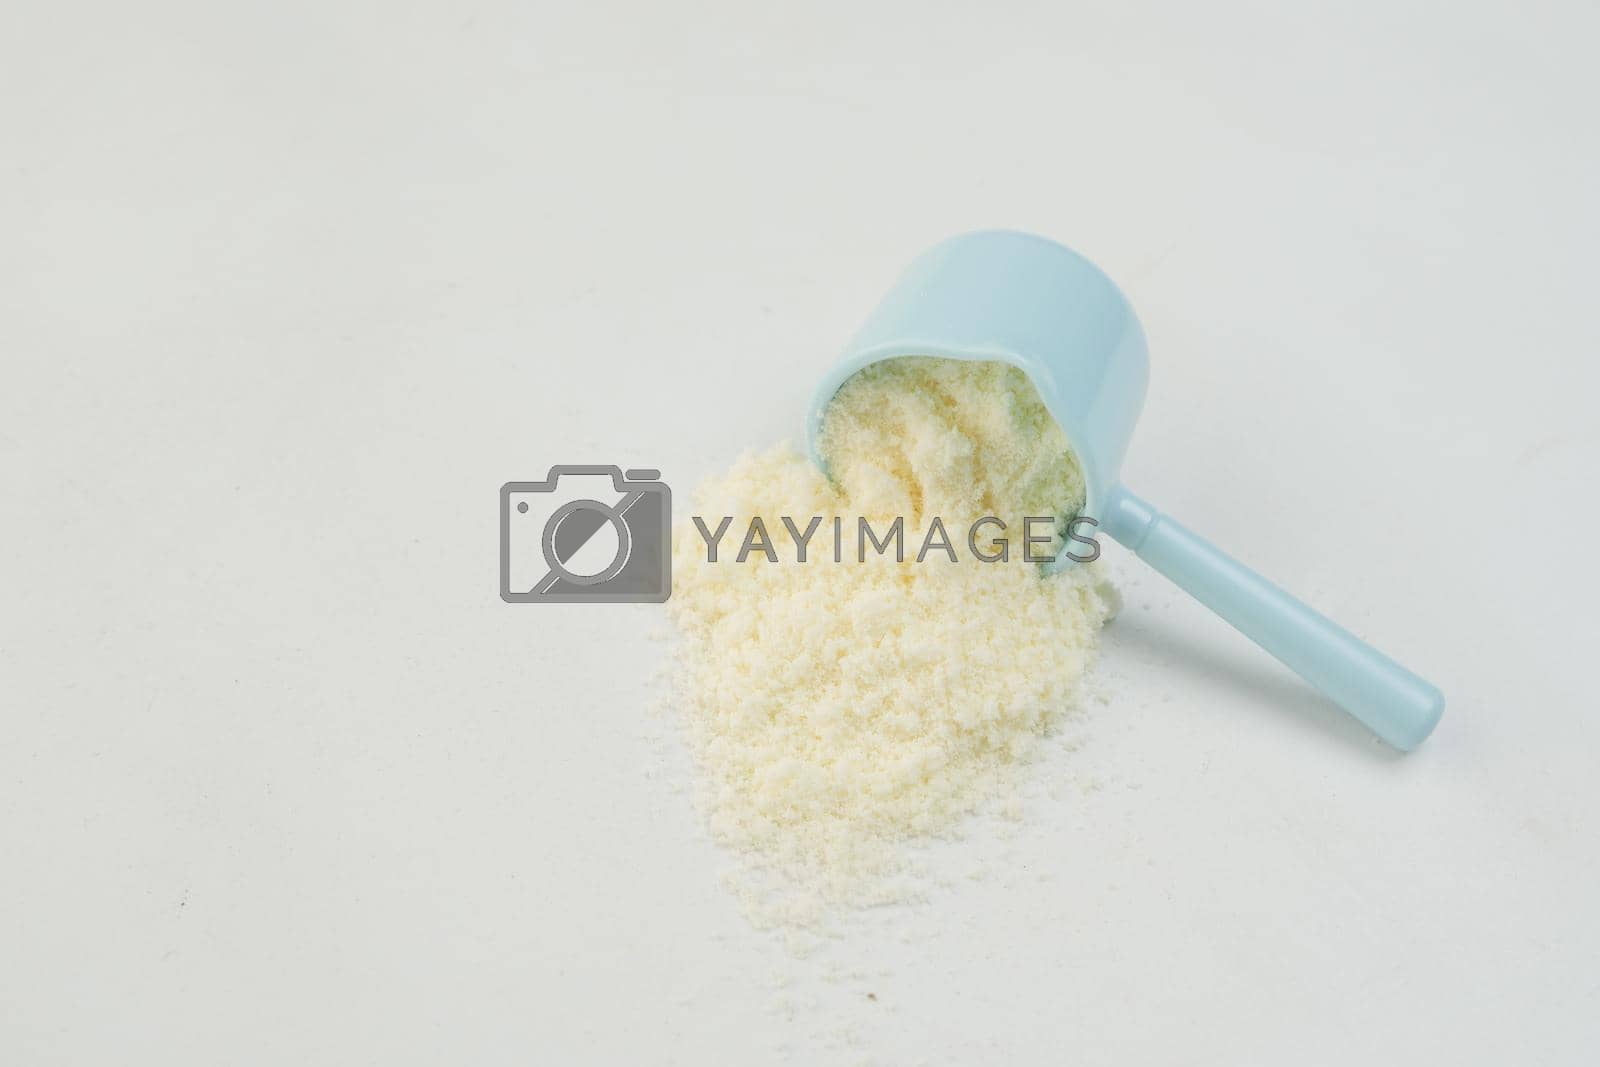 Royalty free image of Close up of baby milk powder and spoon on tile background. by towfiq007